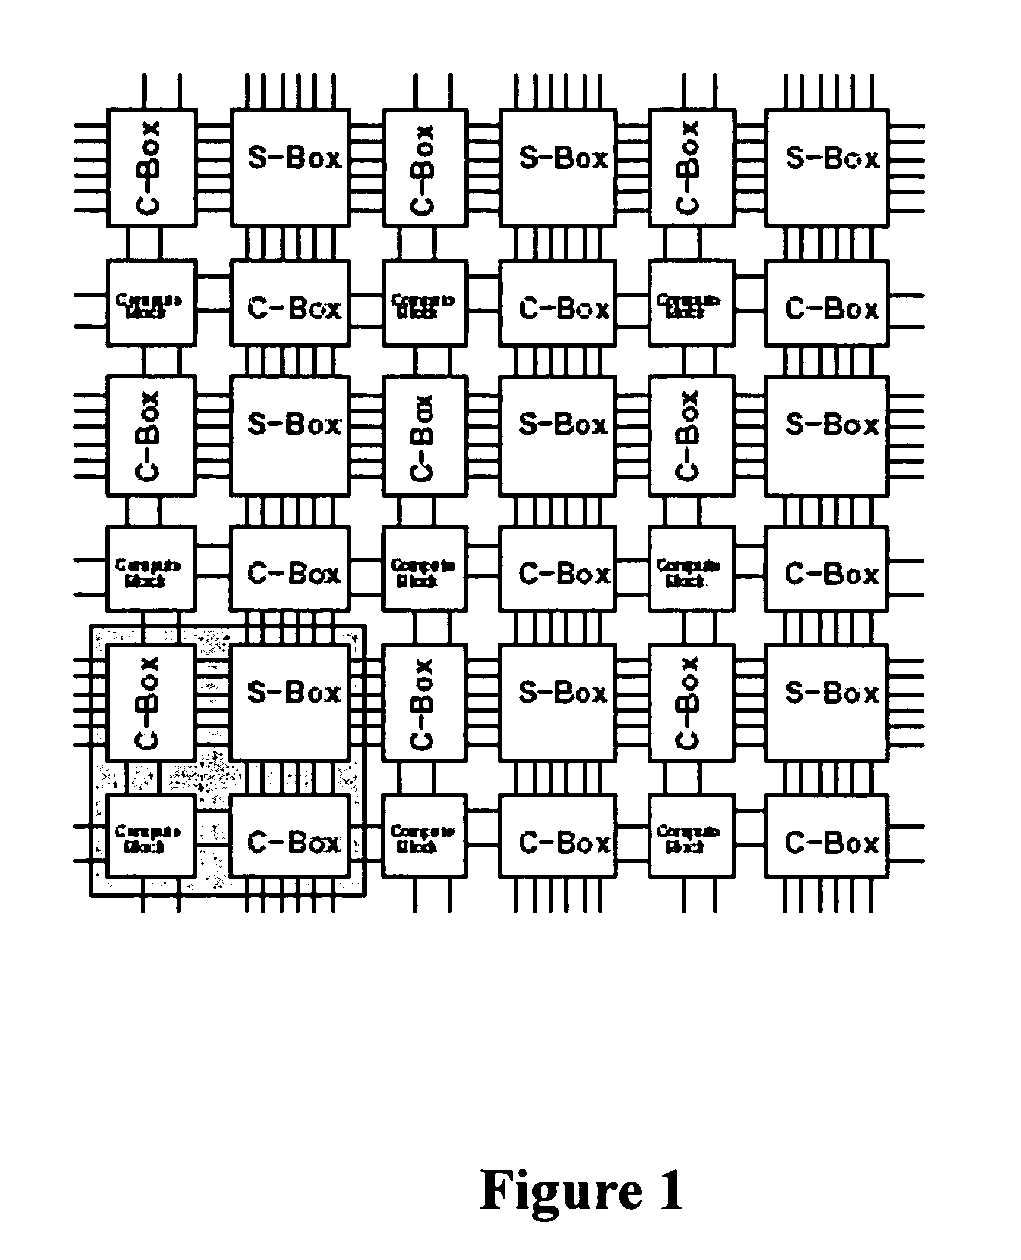 Interconnect structure and method in programmable devices